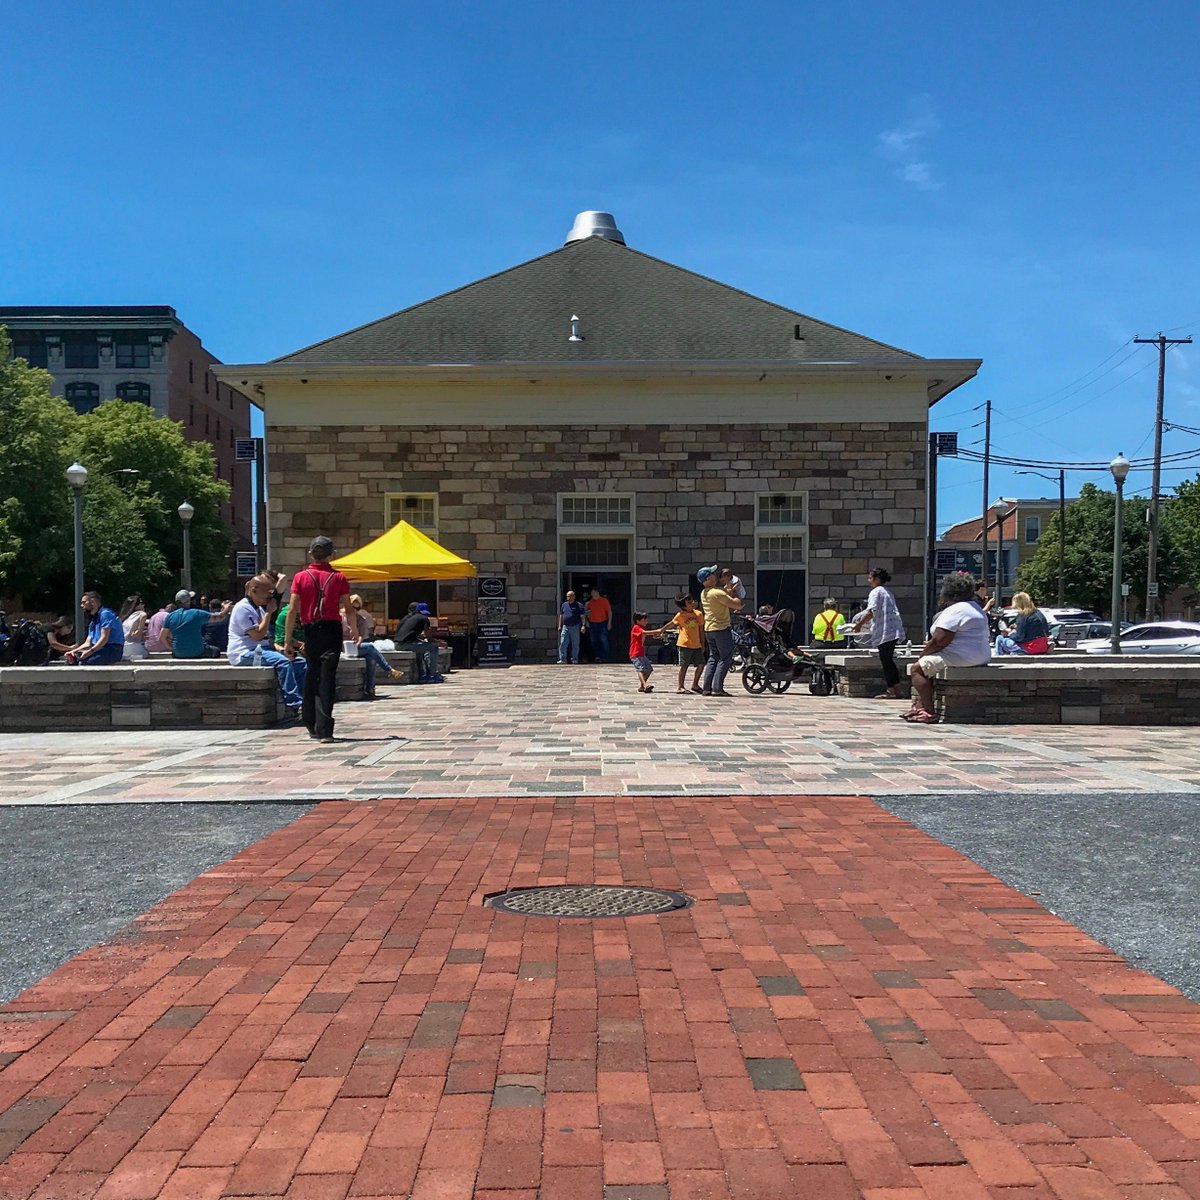 Another beautiful day in the Burg means we’re looking forward to seeing a full plaza of friends once again! Plus, our vendors are ready for the Memorial Day rush with a variety of specials throughout the market. Burgers, fresh fruit and veggies, fish, sweets and so much more!